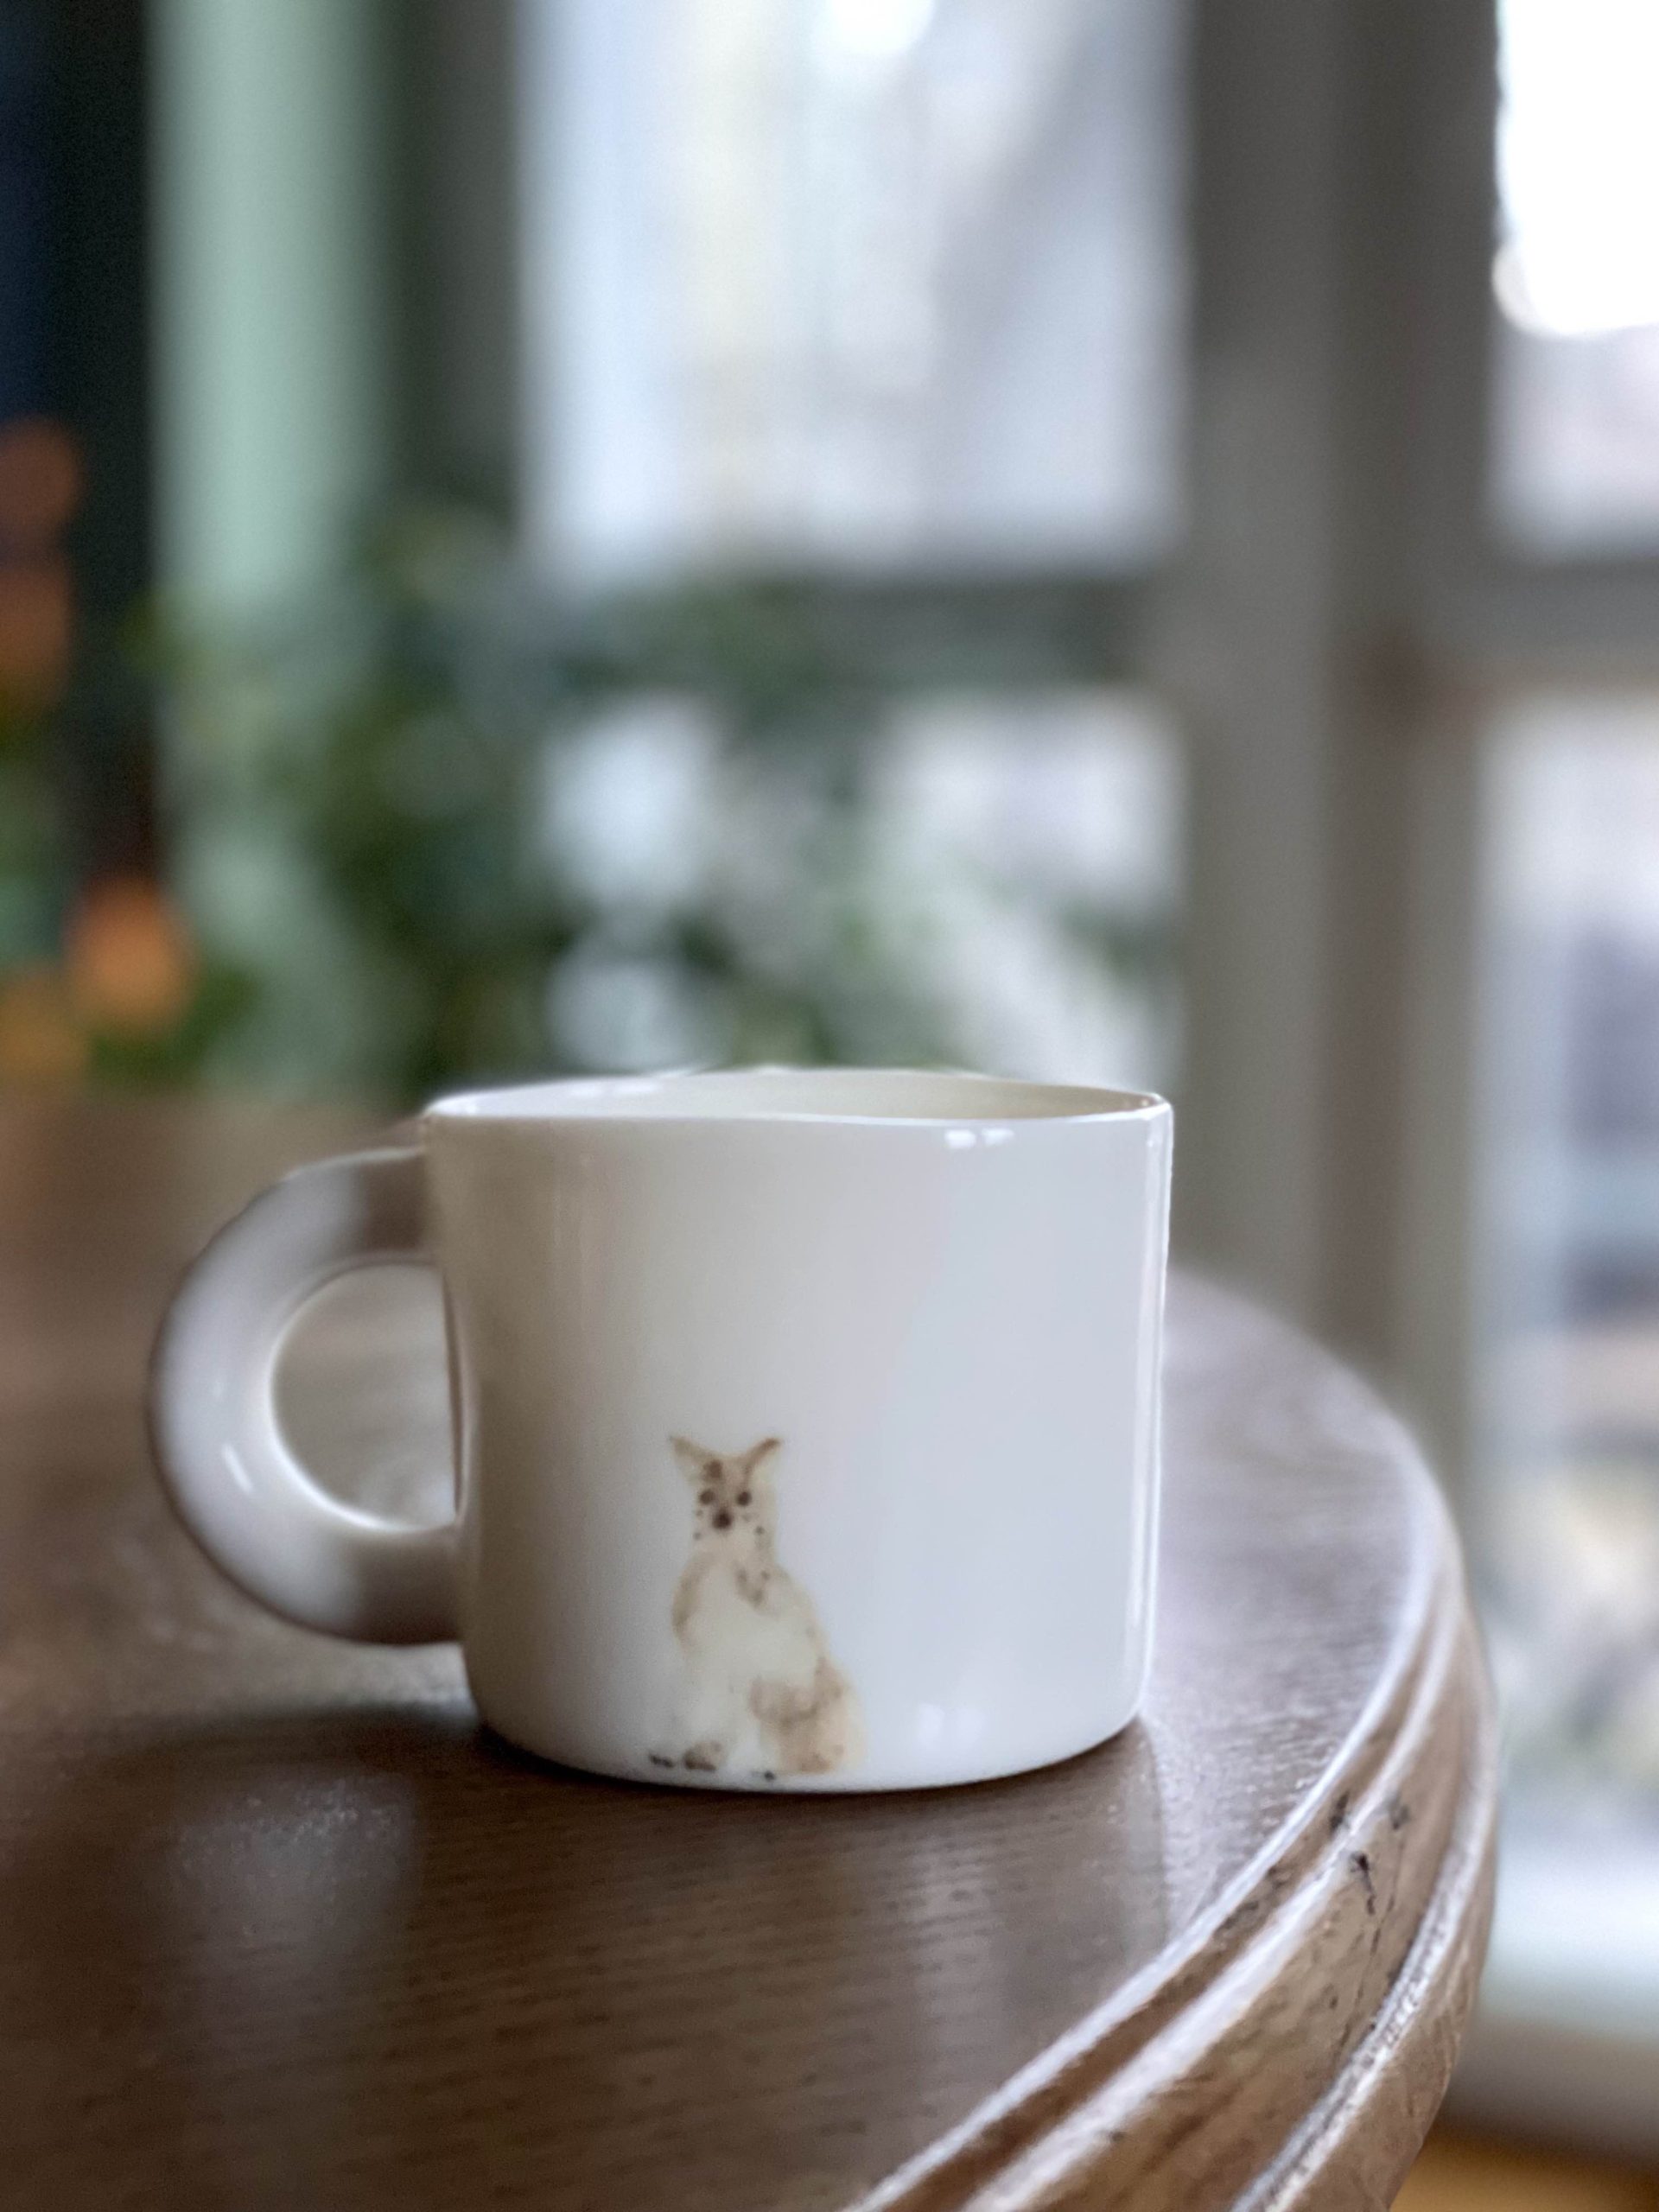 A mug with a dog, the mug has a capacity of 200 ml, the dog illustration is hand-painted